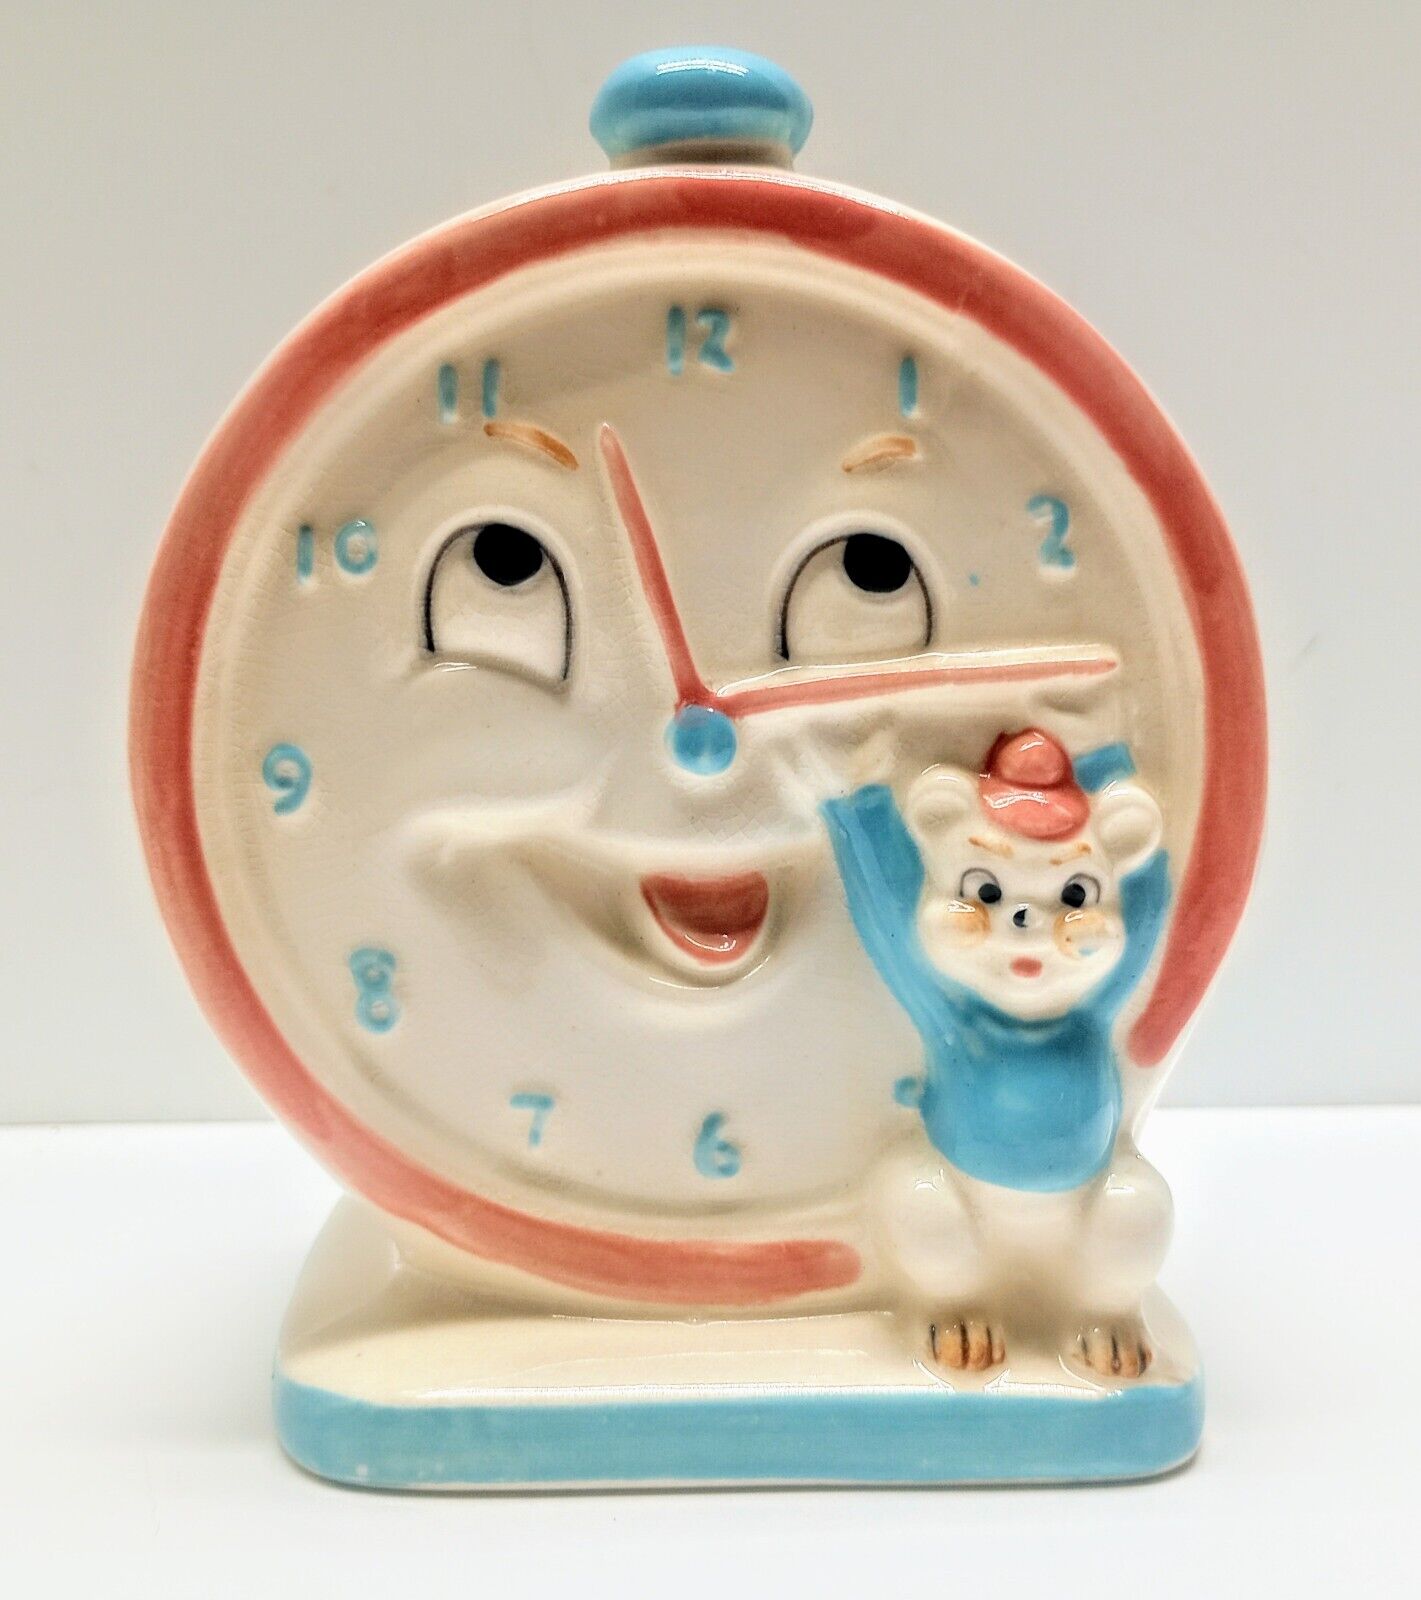 Vintage Whimsical Clock Face Mouse Napco Planter Pink Blue Baby Anthropomorphic